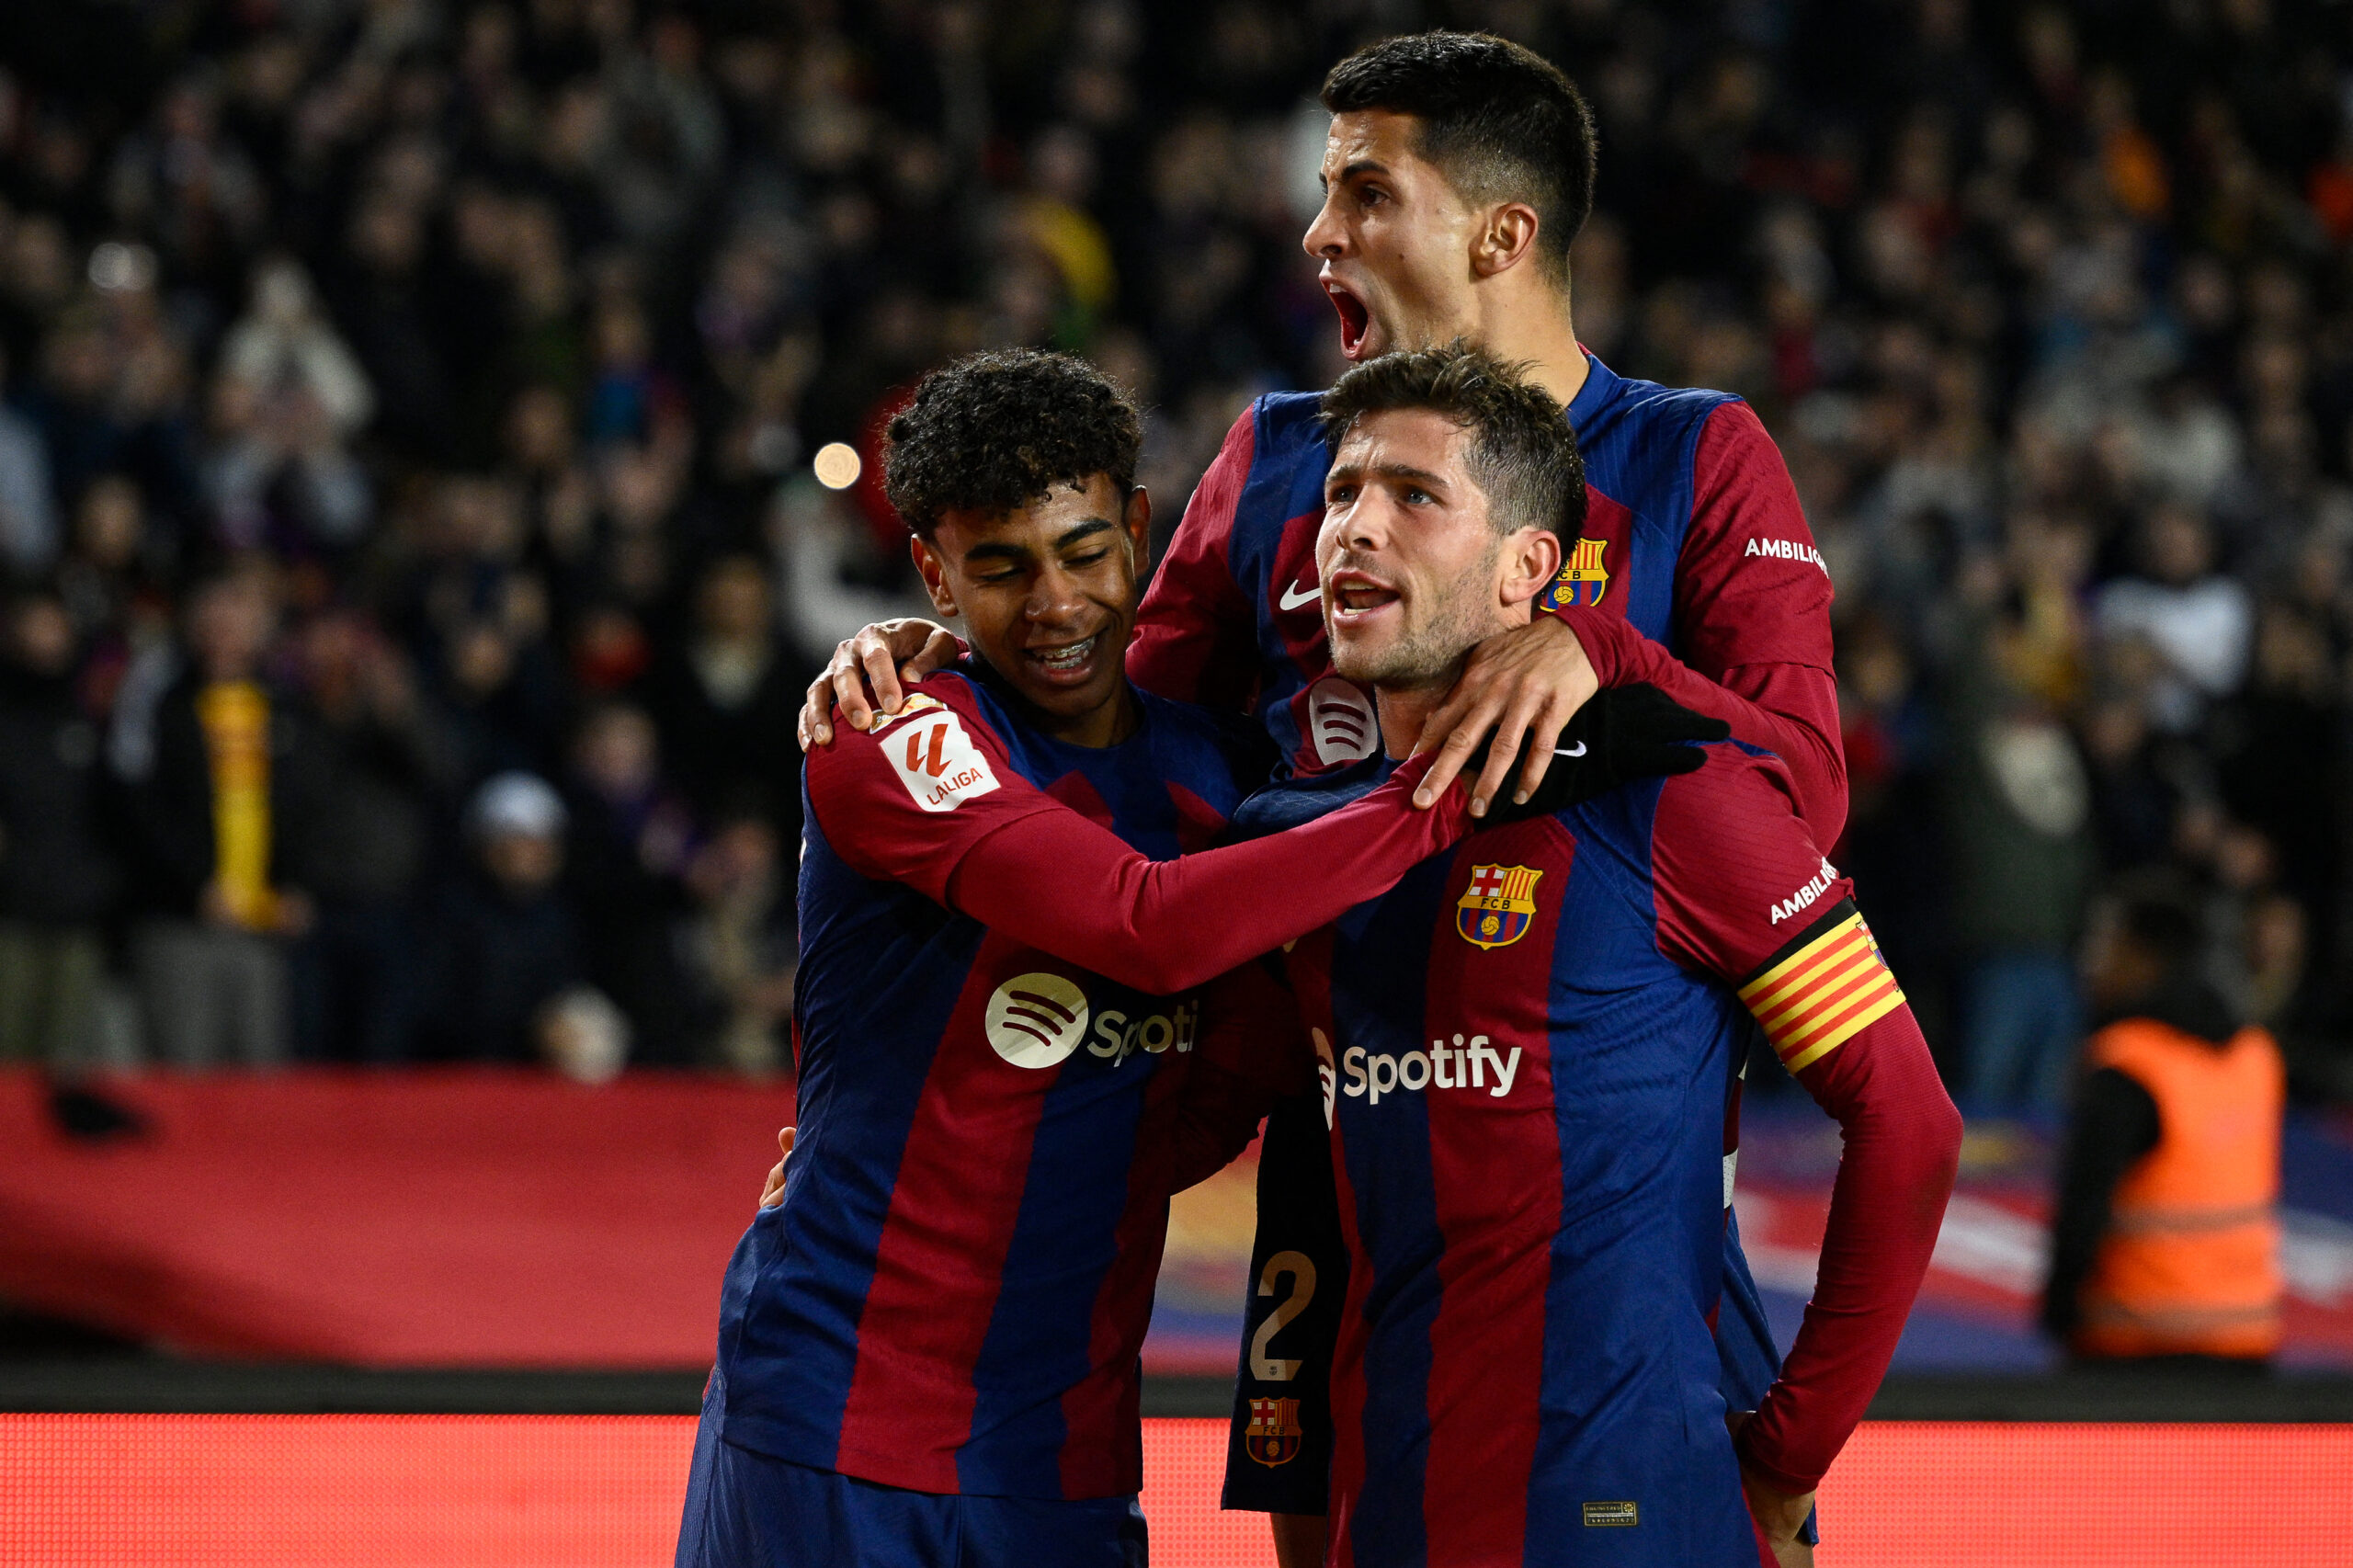 Barcelona's Spanish midfielder #20 Sergi Roberto celebrates with teammates after scoring his team's third goal during the Spanish league football match between FC Barcelona and UD Almeria at the Estadi Olimpic Lluis Companys in Barcelona on December 20, 2023.